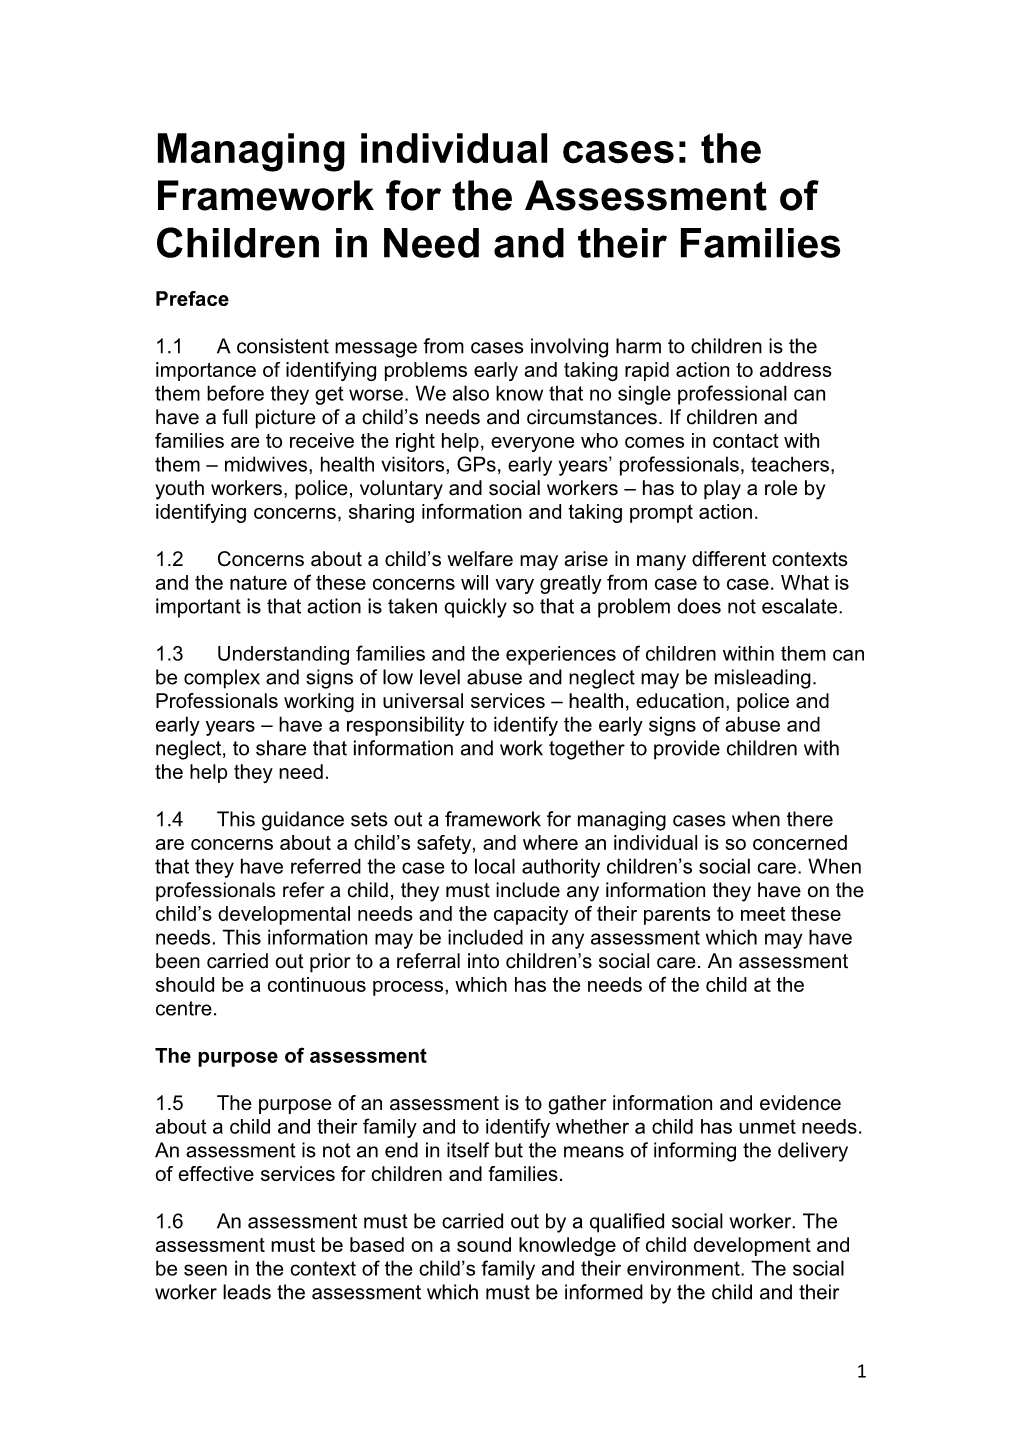 Managing Individual Cases: the Framework for the Assessment of Children in Need and Their